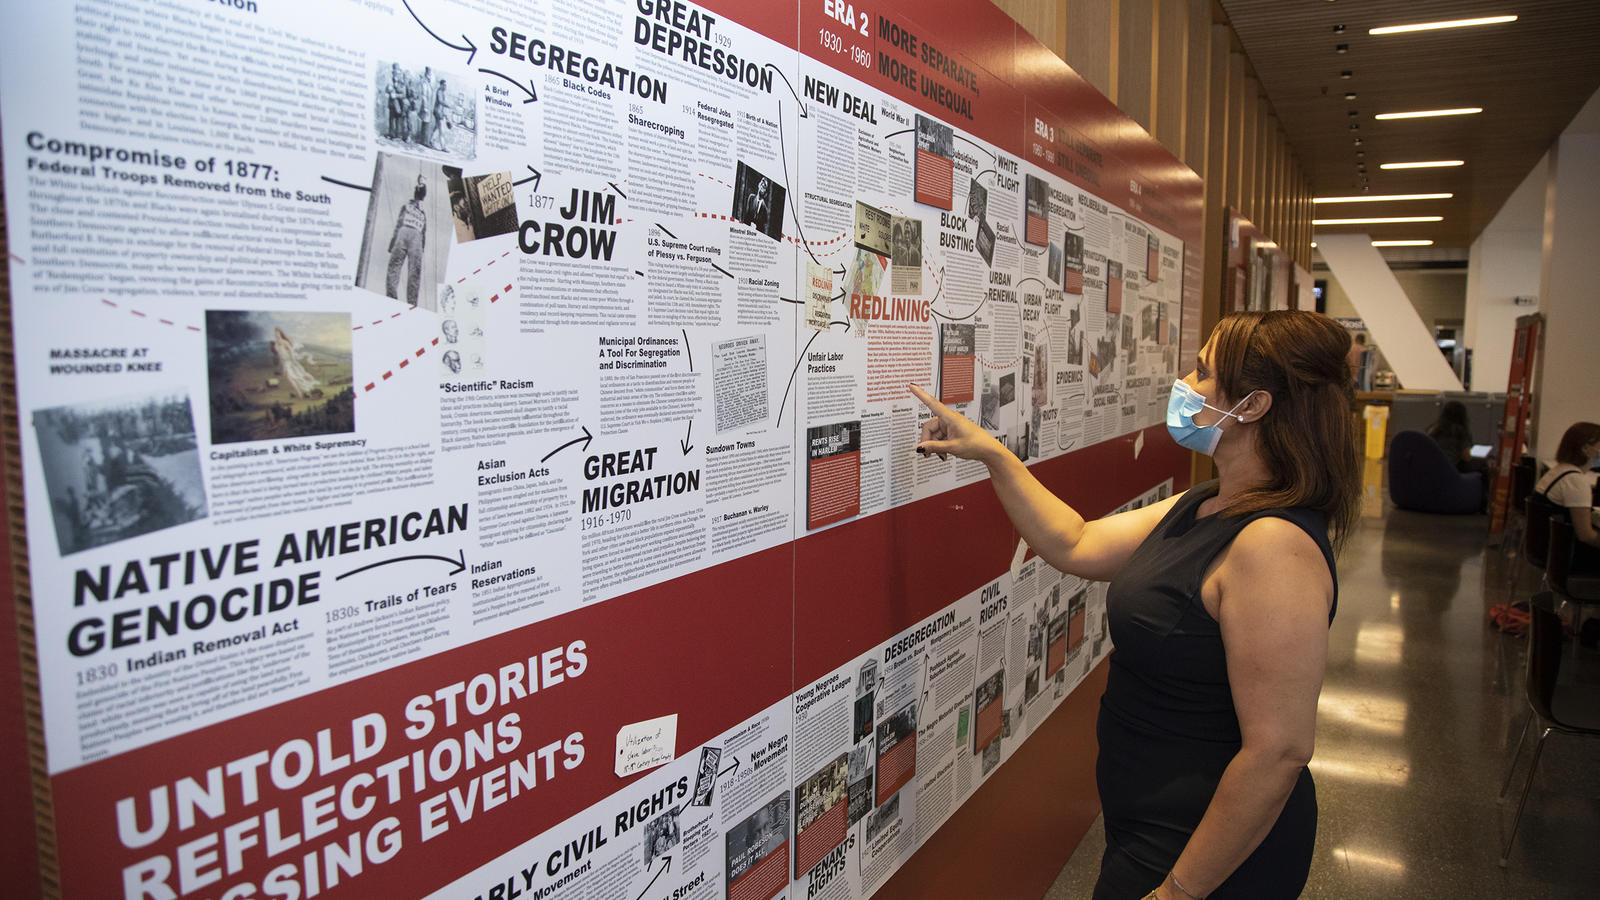 Woman pointing at exhibit text about redlining